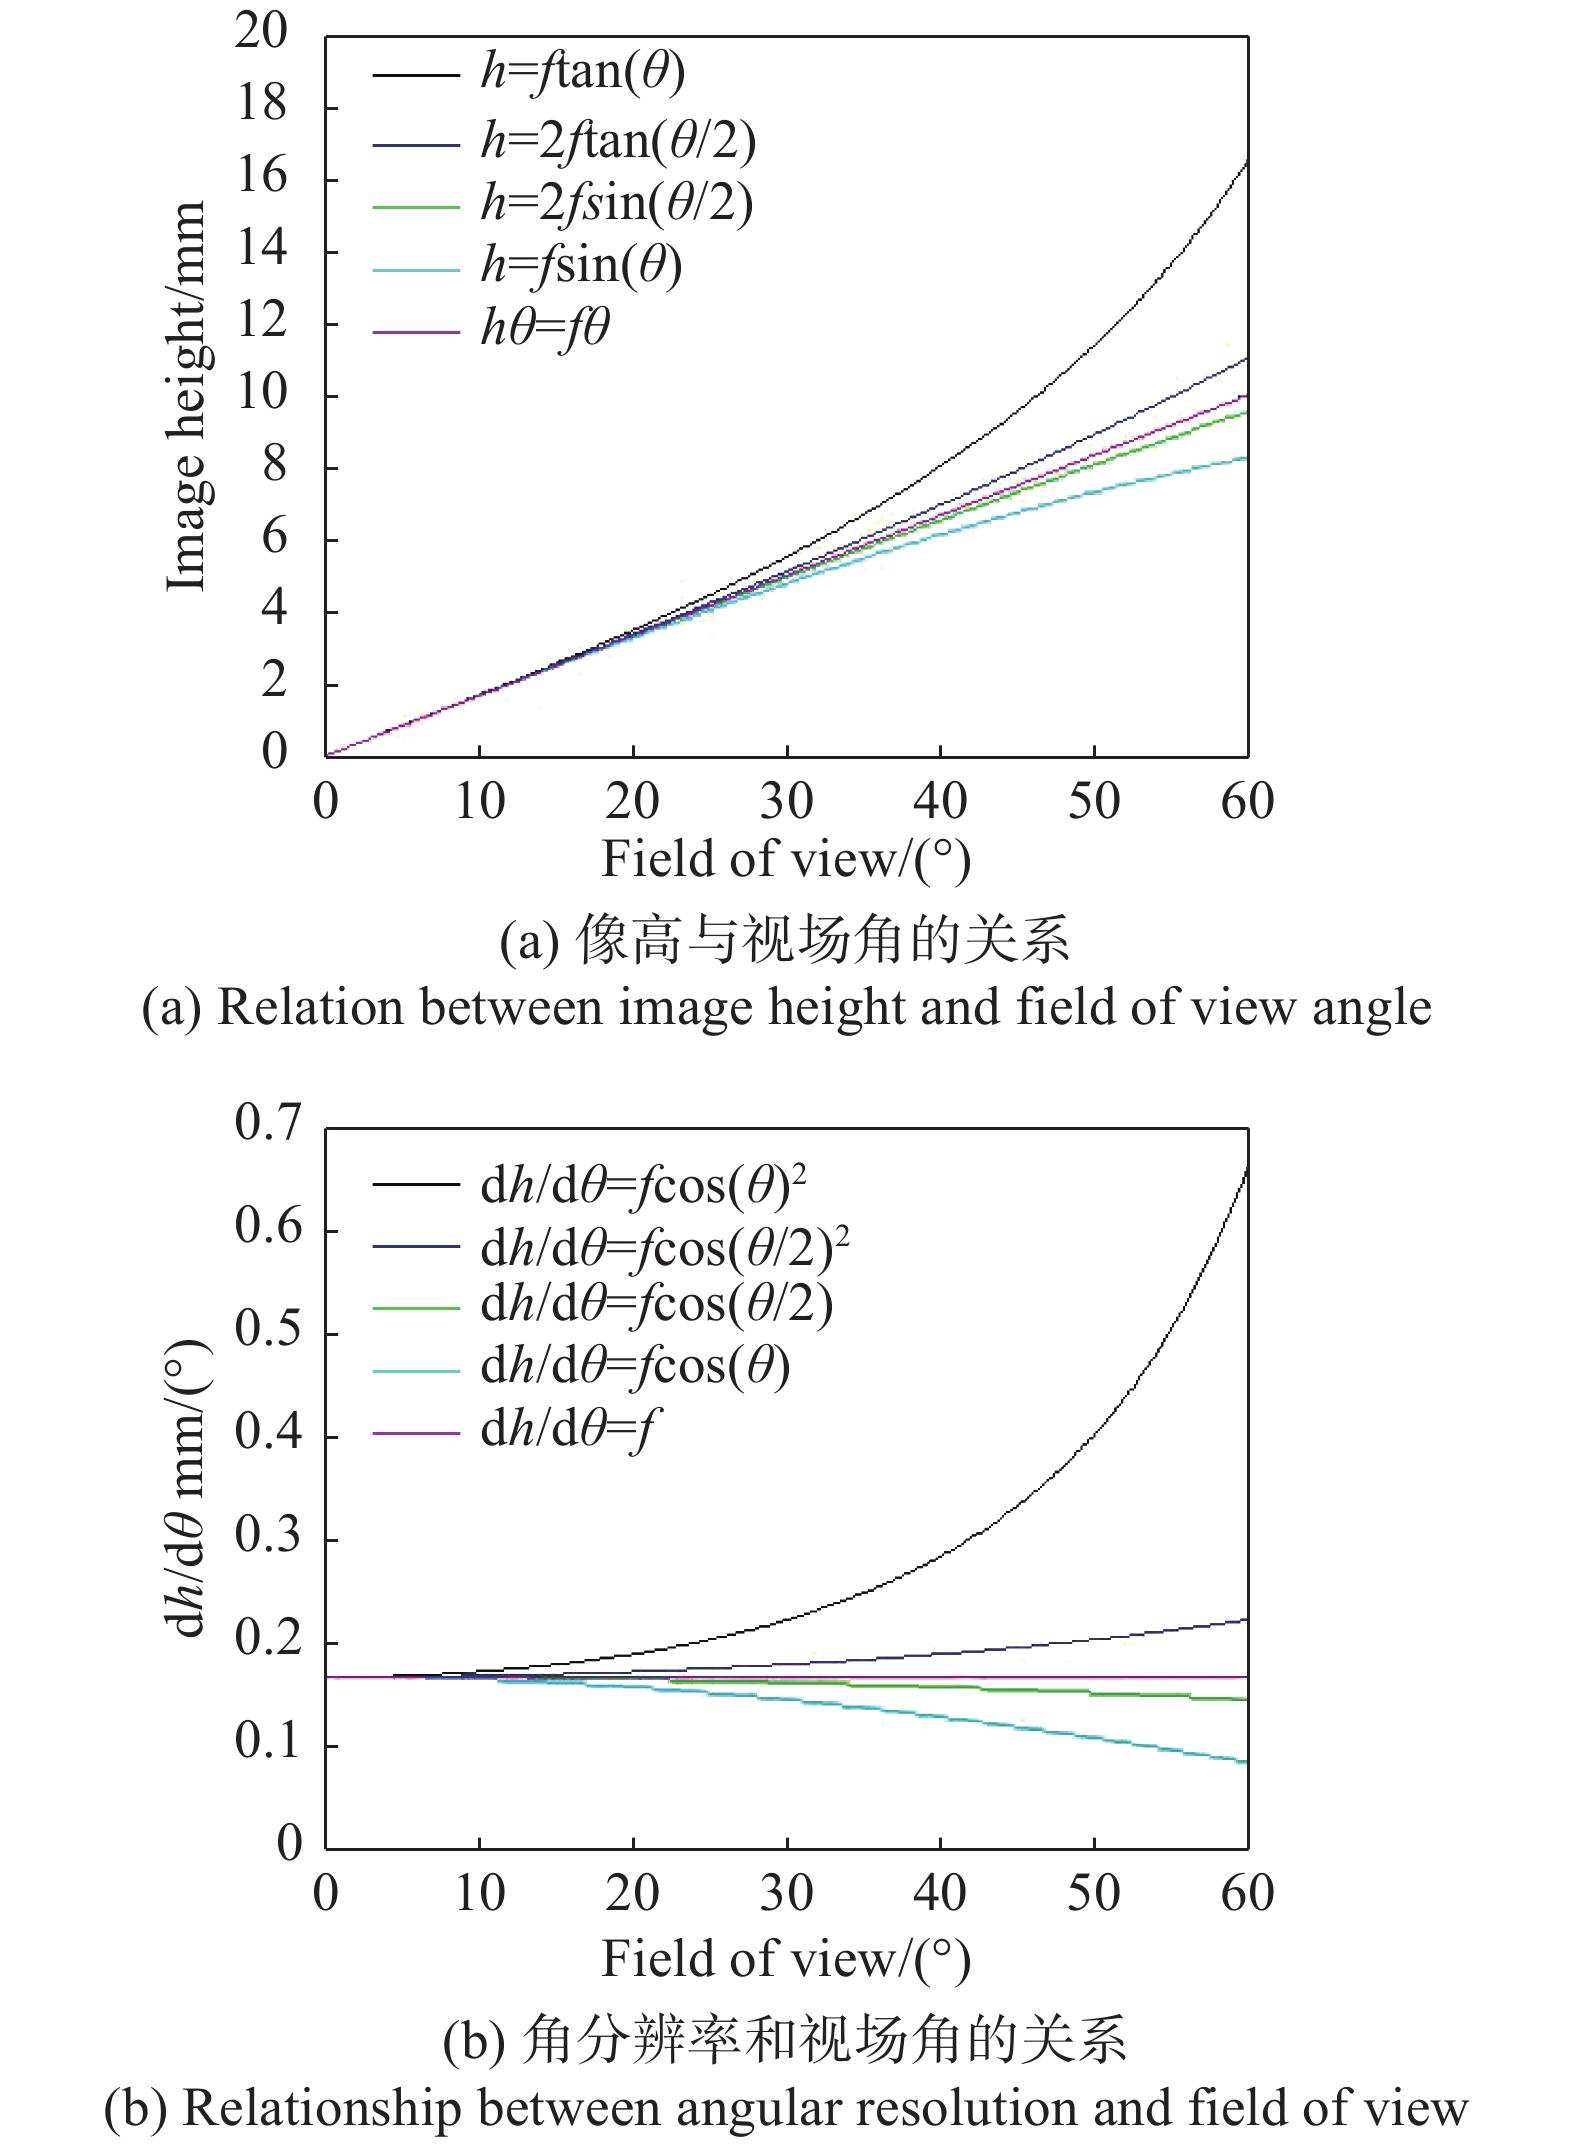 Relationship between the image height and angular resolution with angle of view under different projection modes